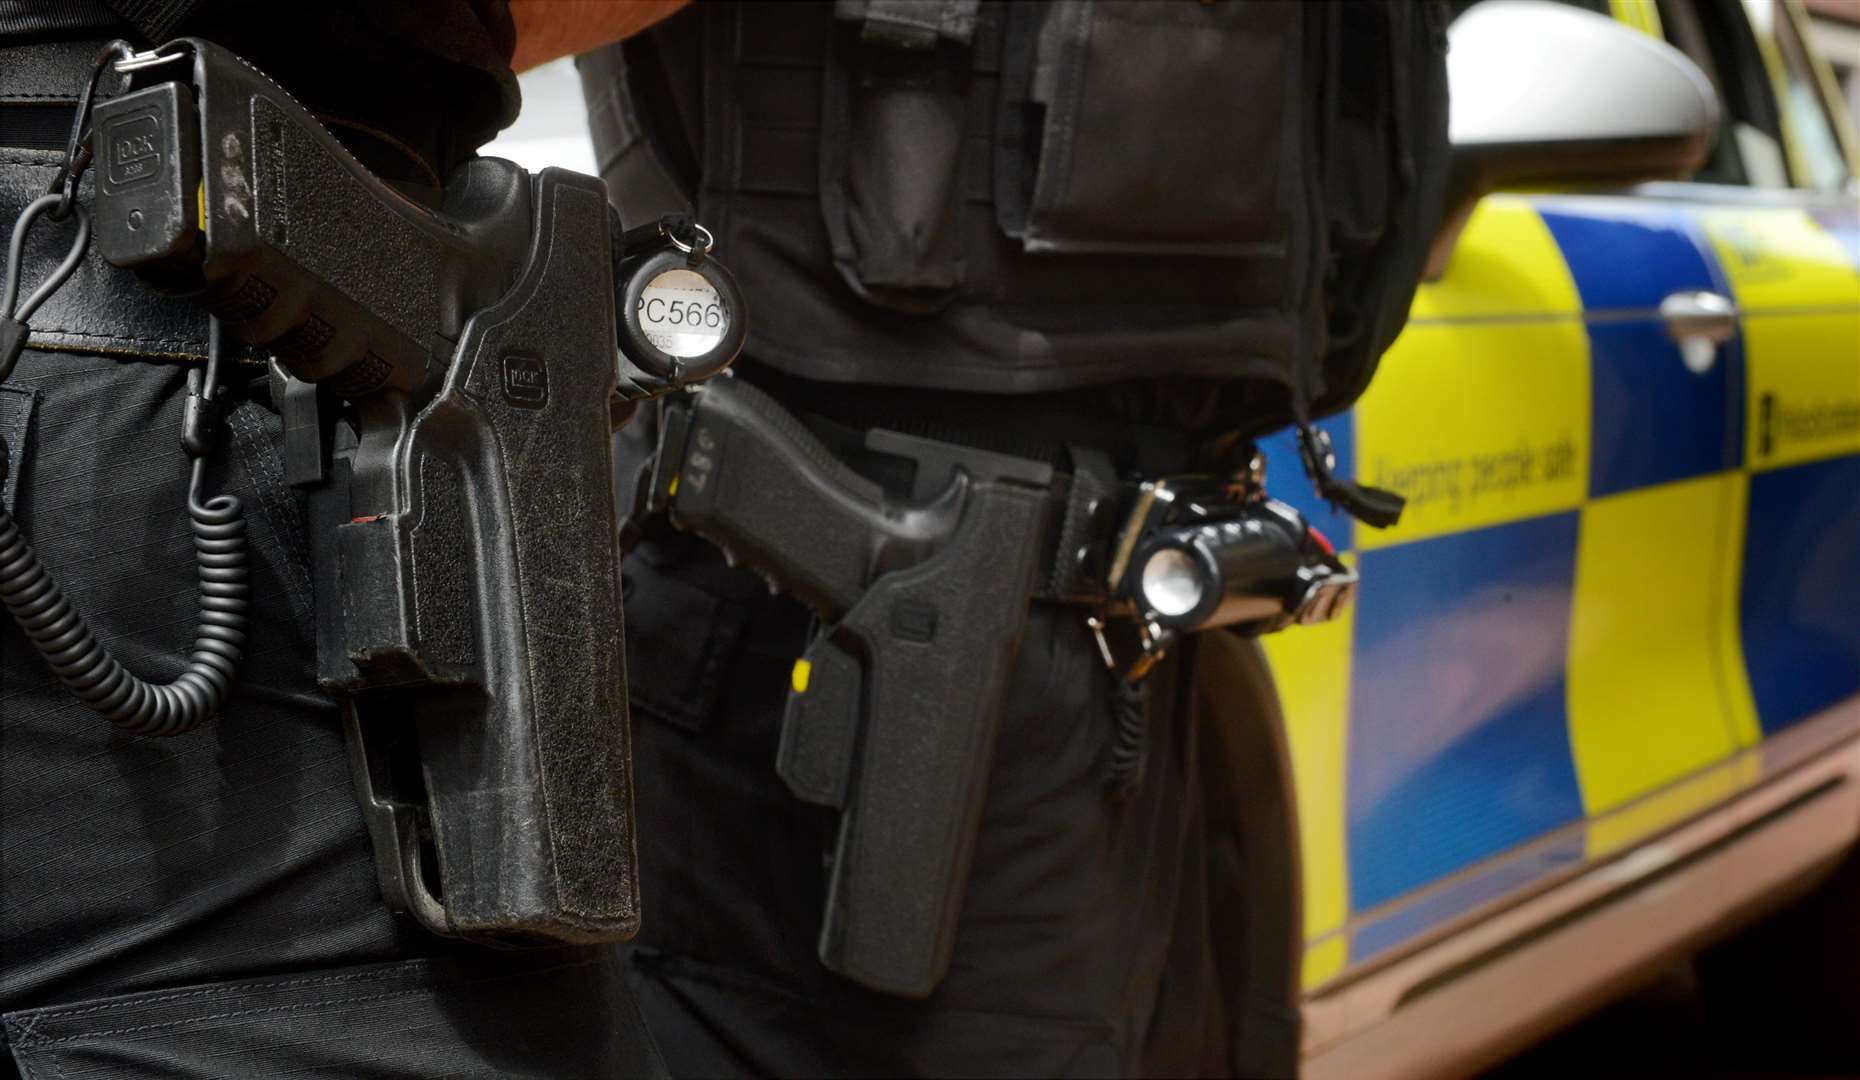 Armed police response unit like this one were sent to Farr yesterday after a 'false call with good intent.'